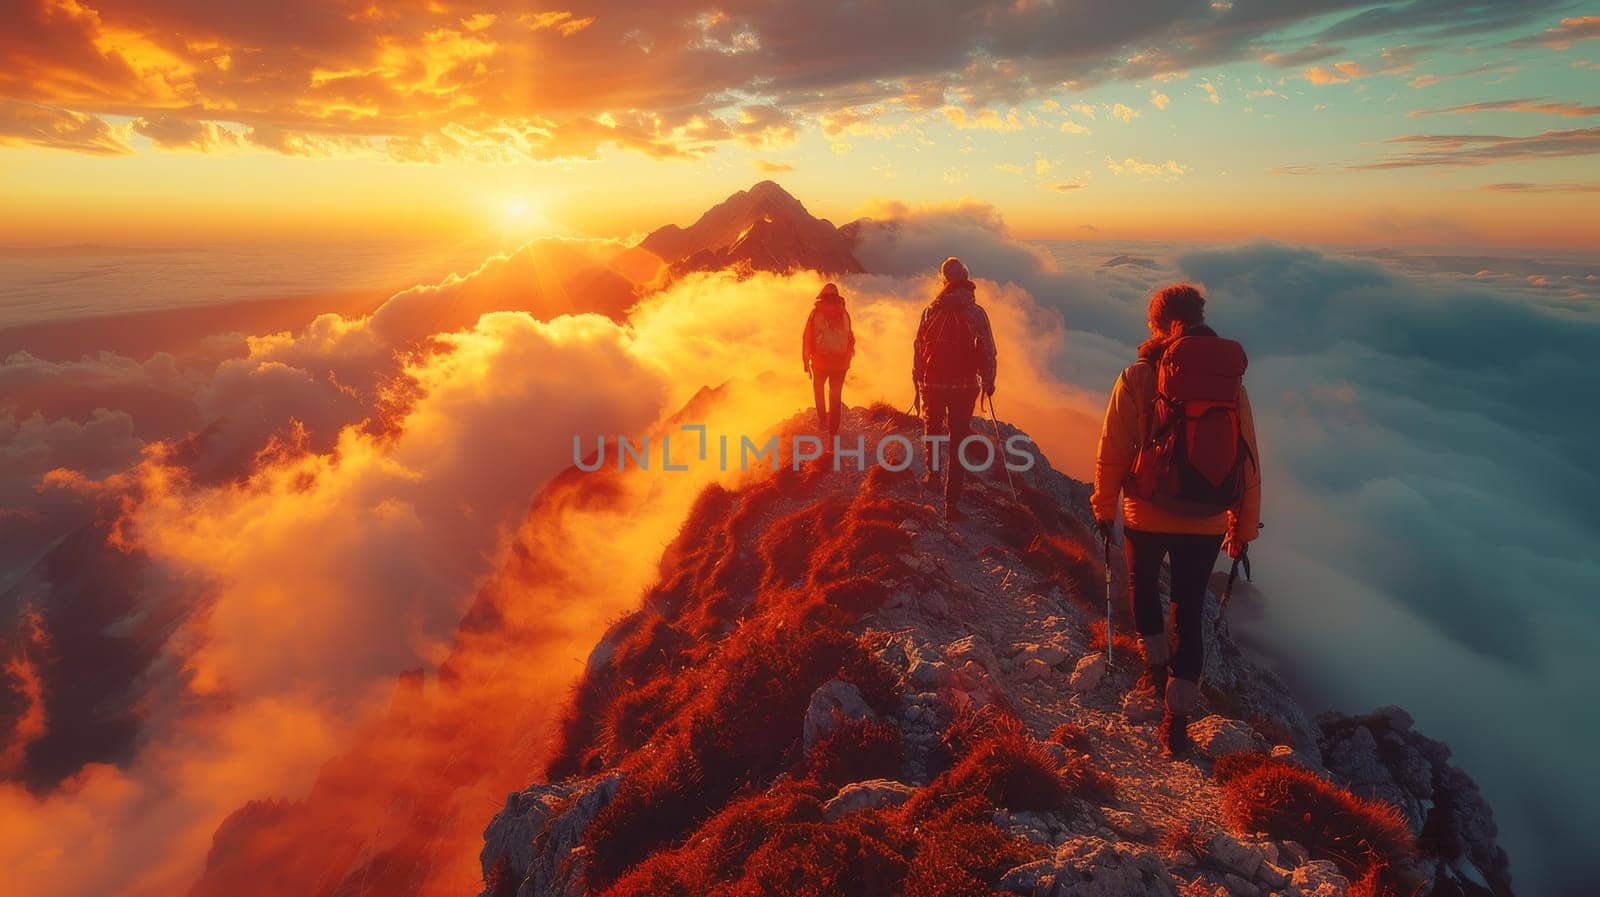 Three people are hiking up a mountain with a beautiful orange sunset in the background. The sky is filled with clouds, and the sun is setting behind the mountain. The hikers are wearing backpacks